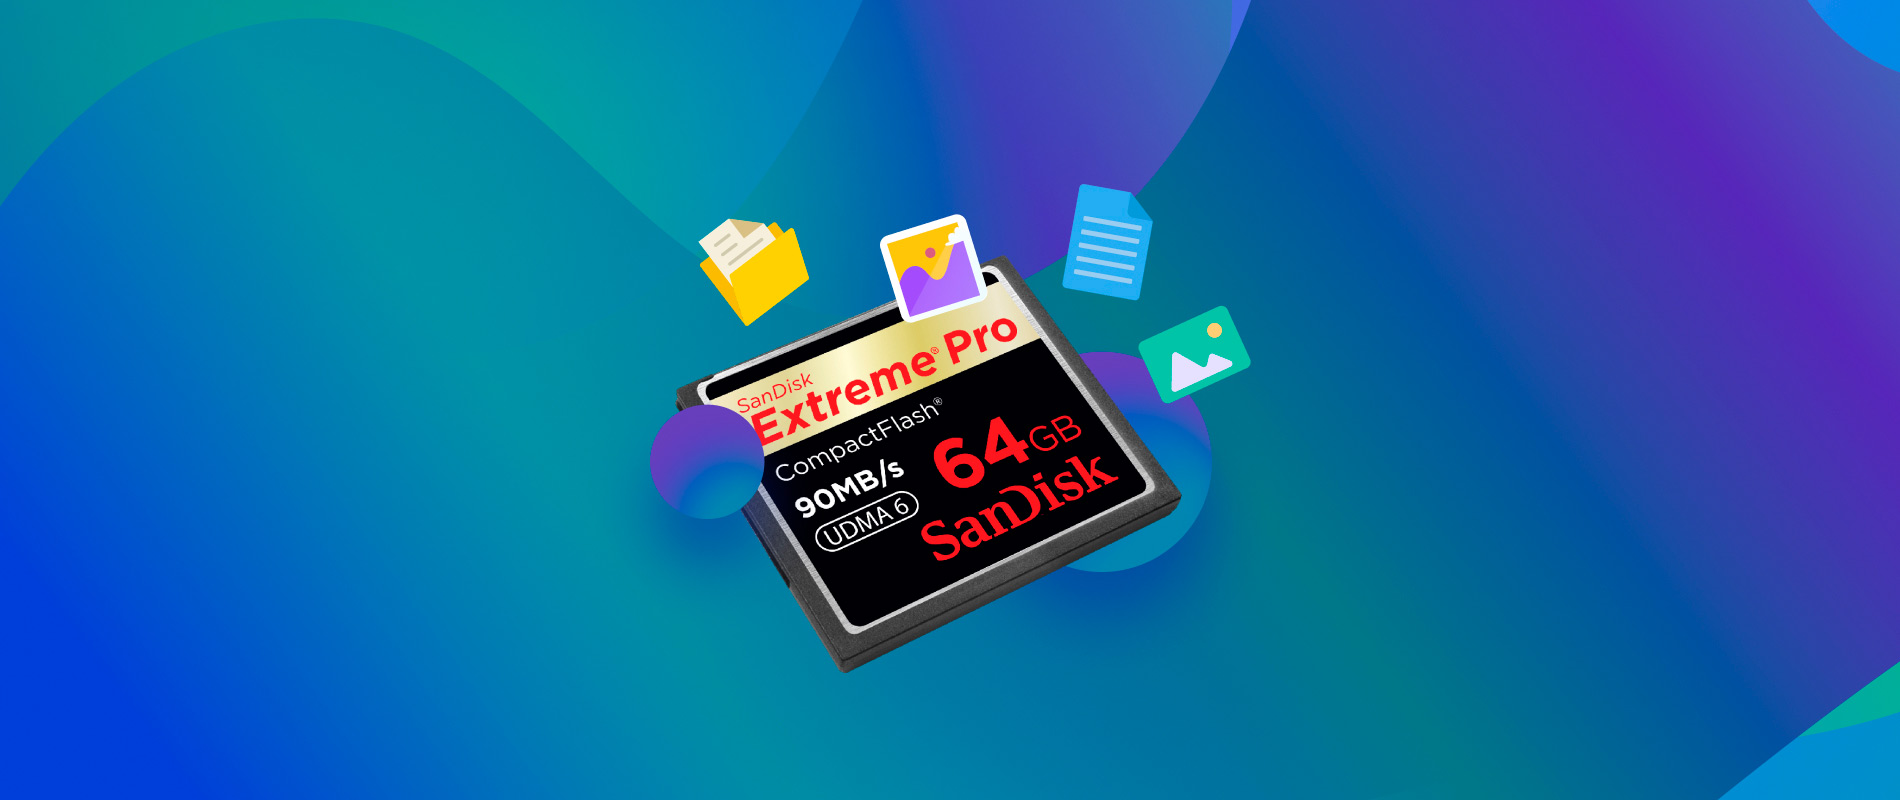 Immediately remove the CF card from the device to prevent further data overwriting.
Avoid saving new files or taking new photos on the CF card.